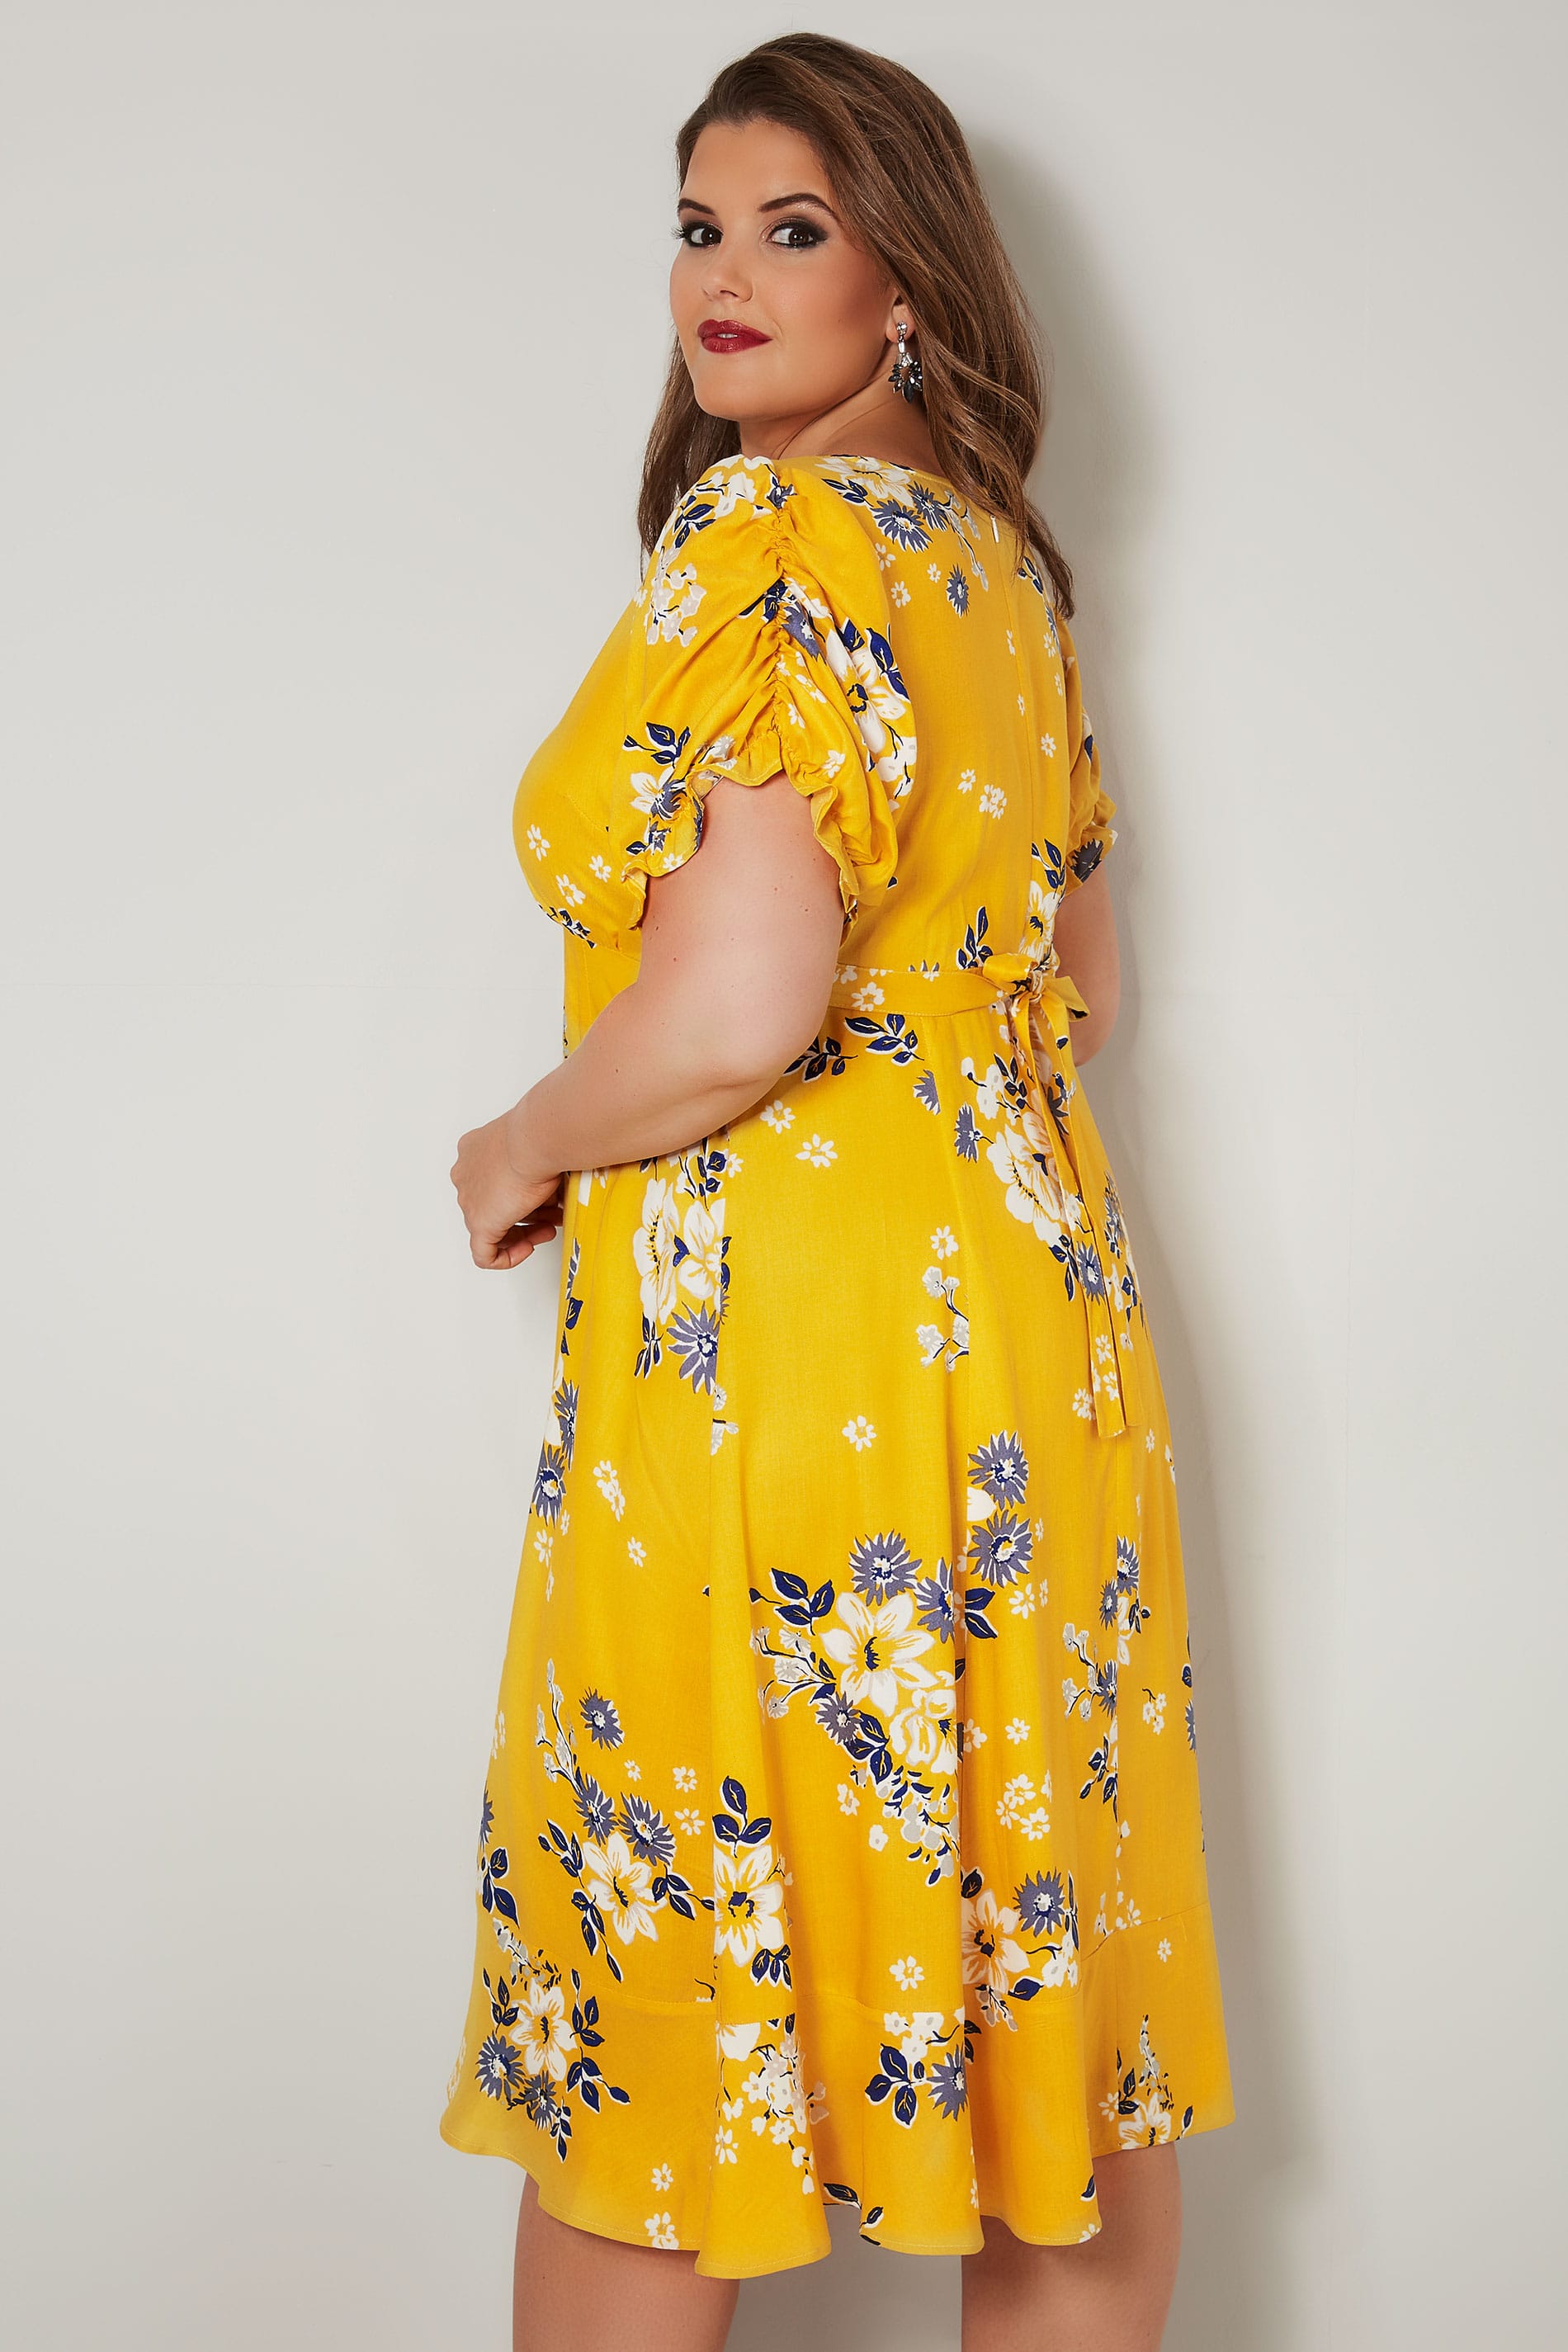 YOURS LONDON Yellow Floral Tea Dress, Plus size 16 to 32